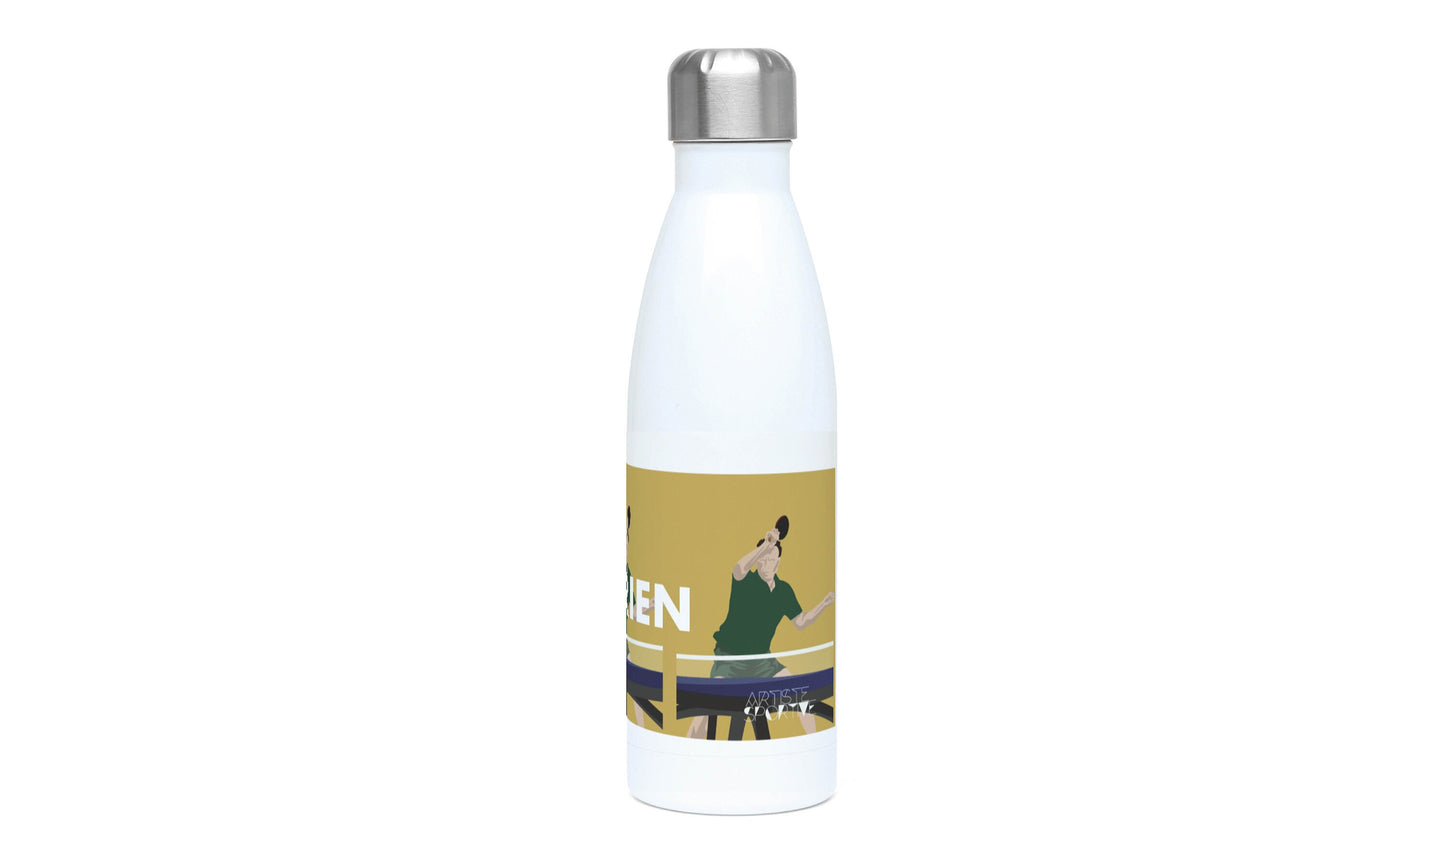 Ping Pong insulated bottle "The table tennis player" - customizable